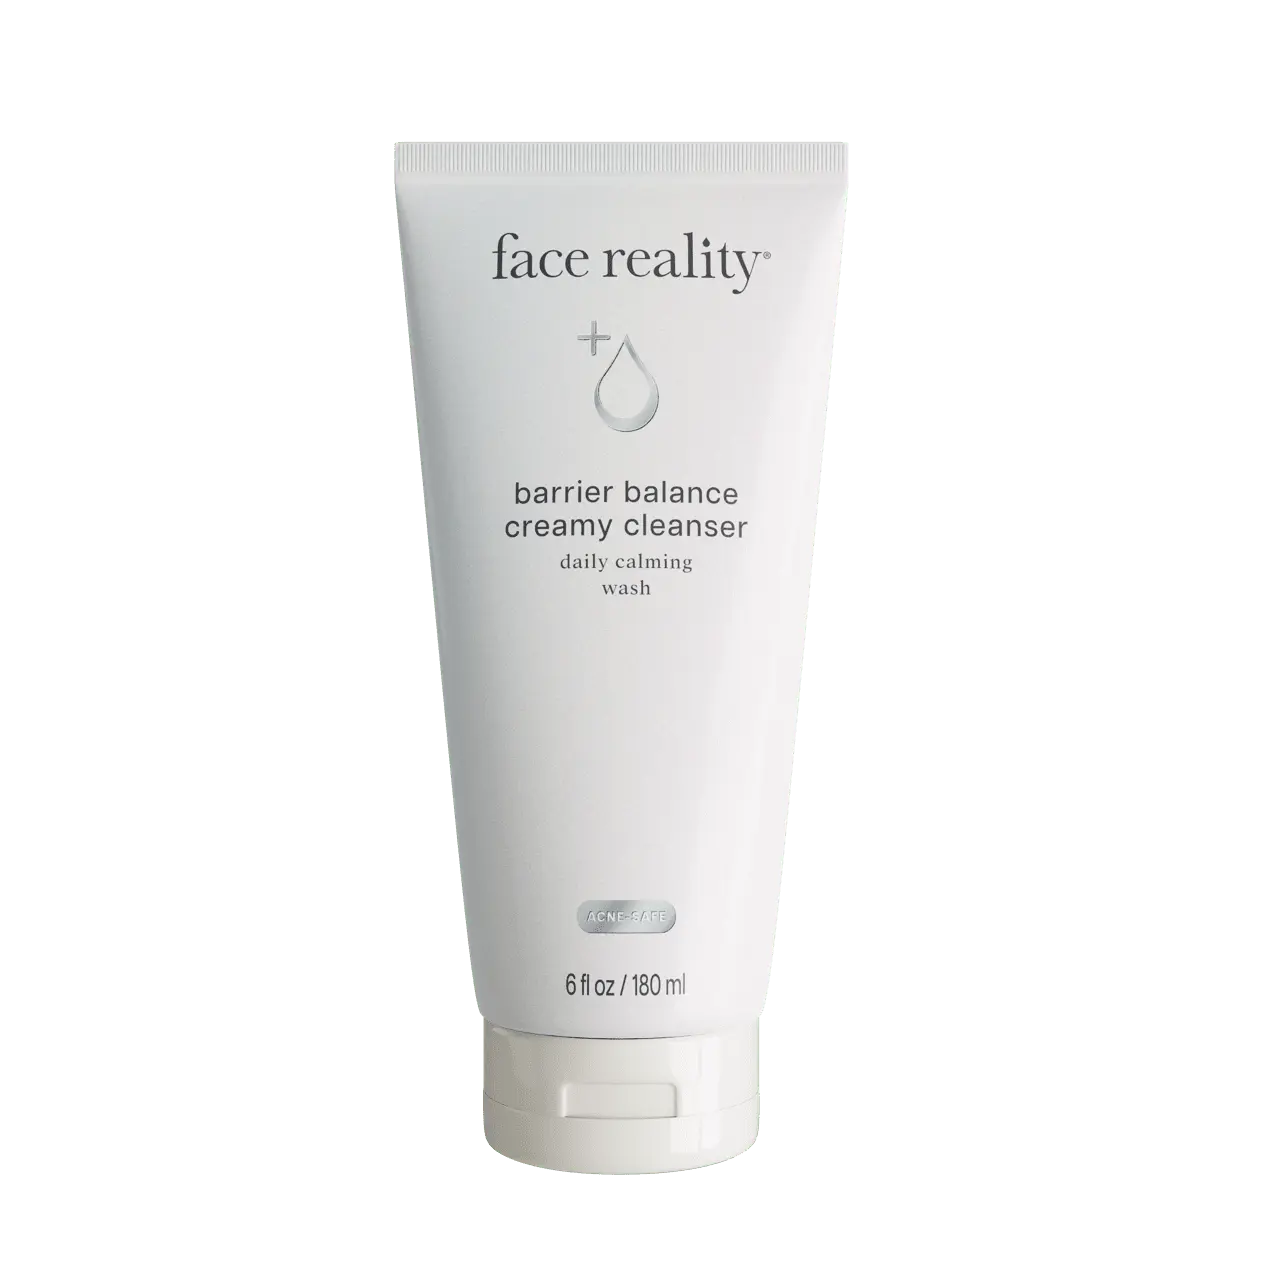 Face Reality cleanser soothes, hydrates acne-prone skin